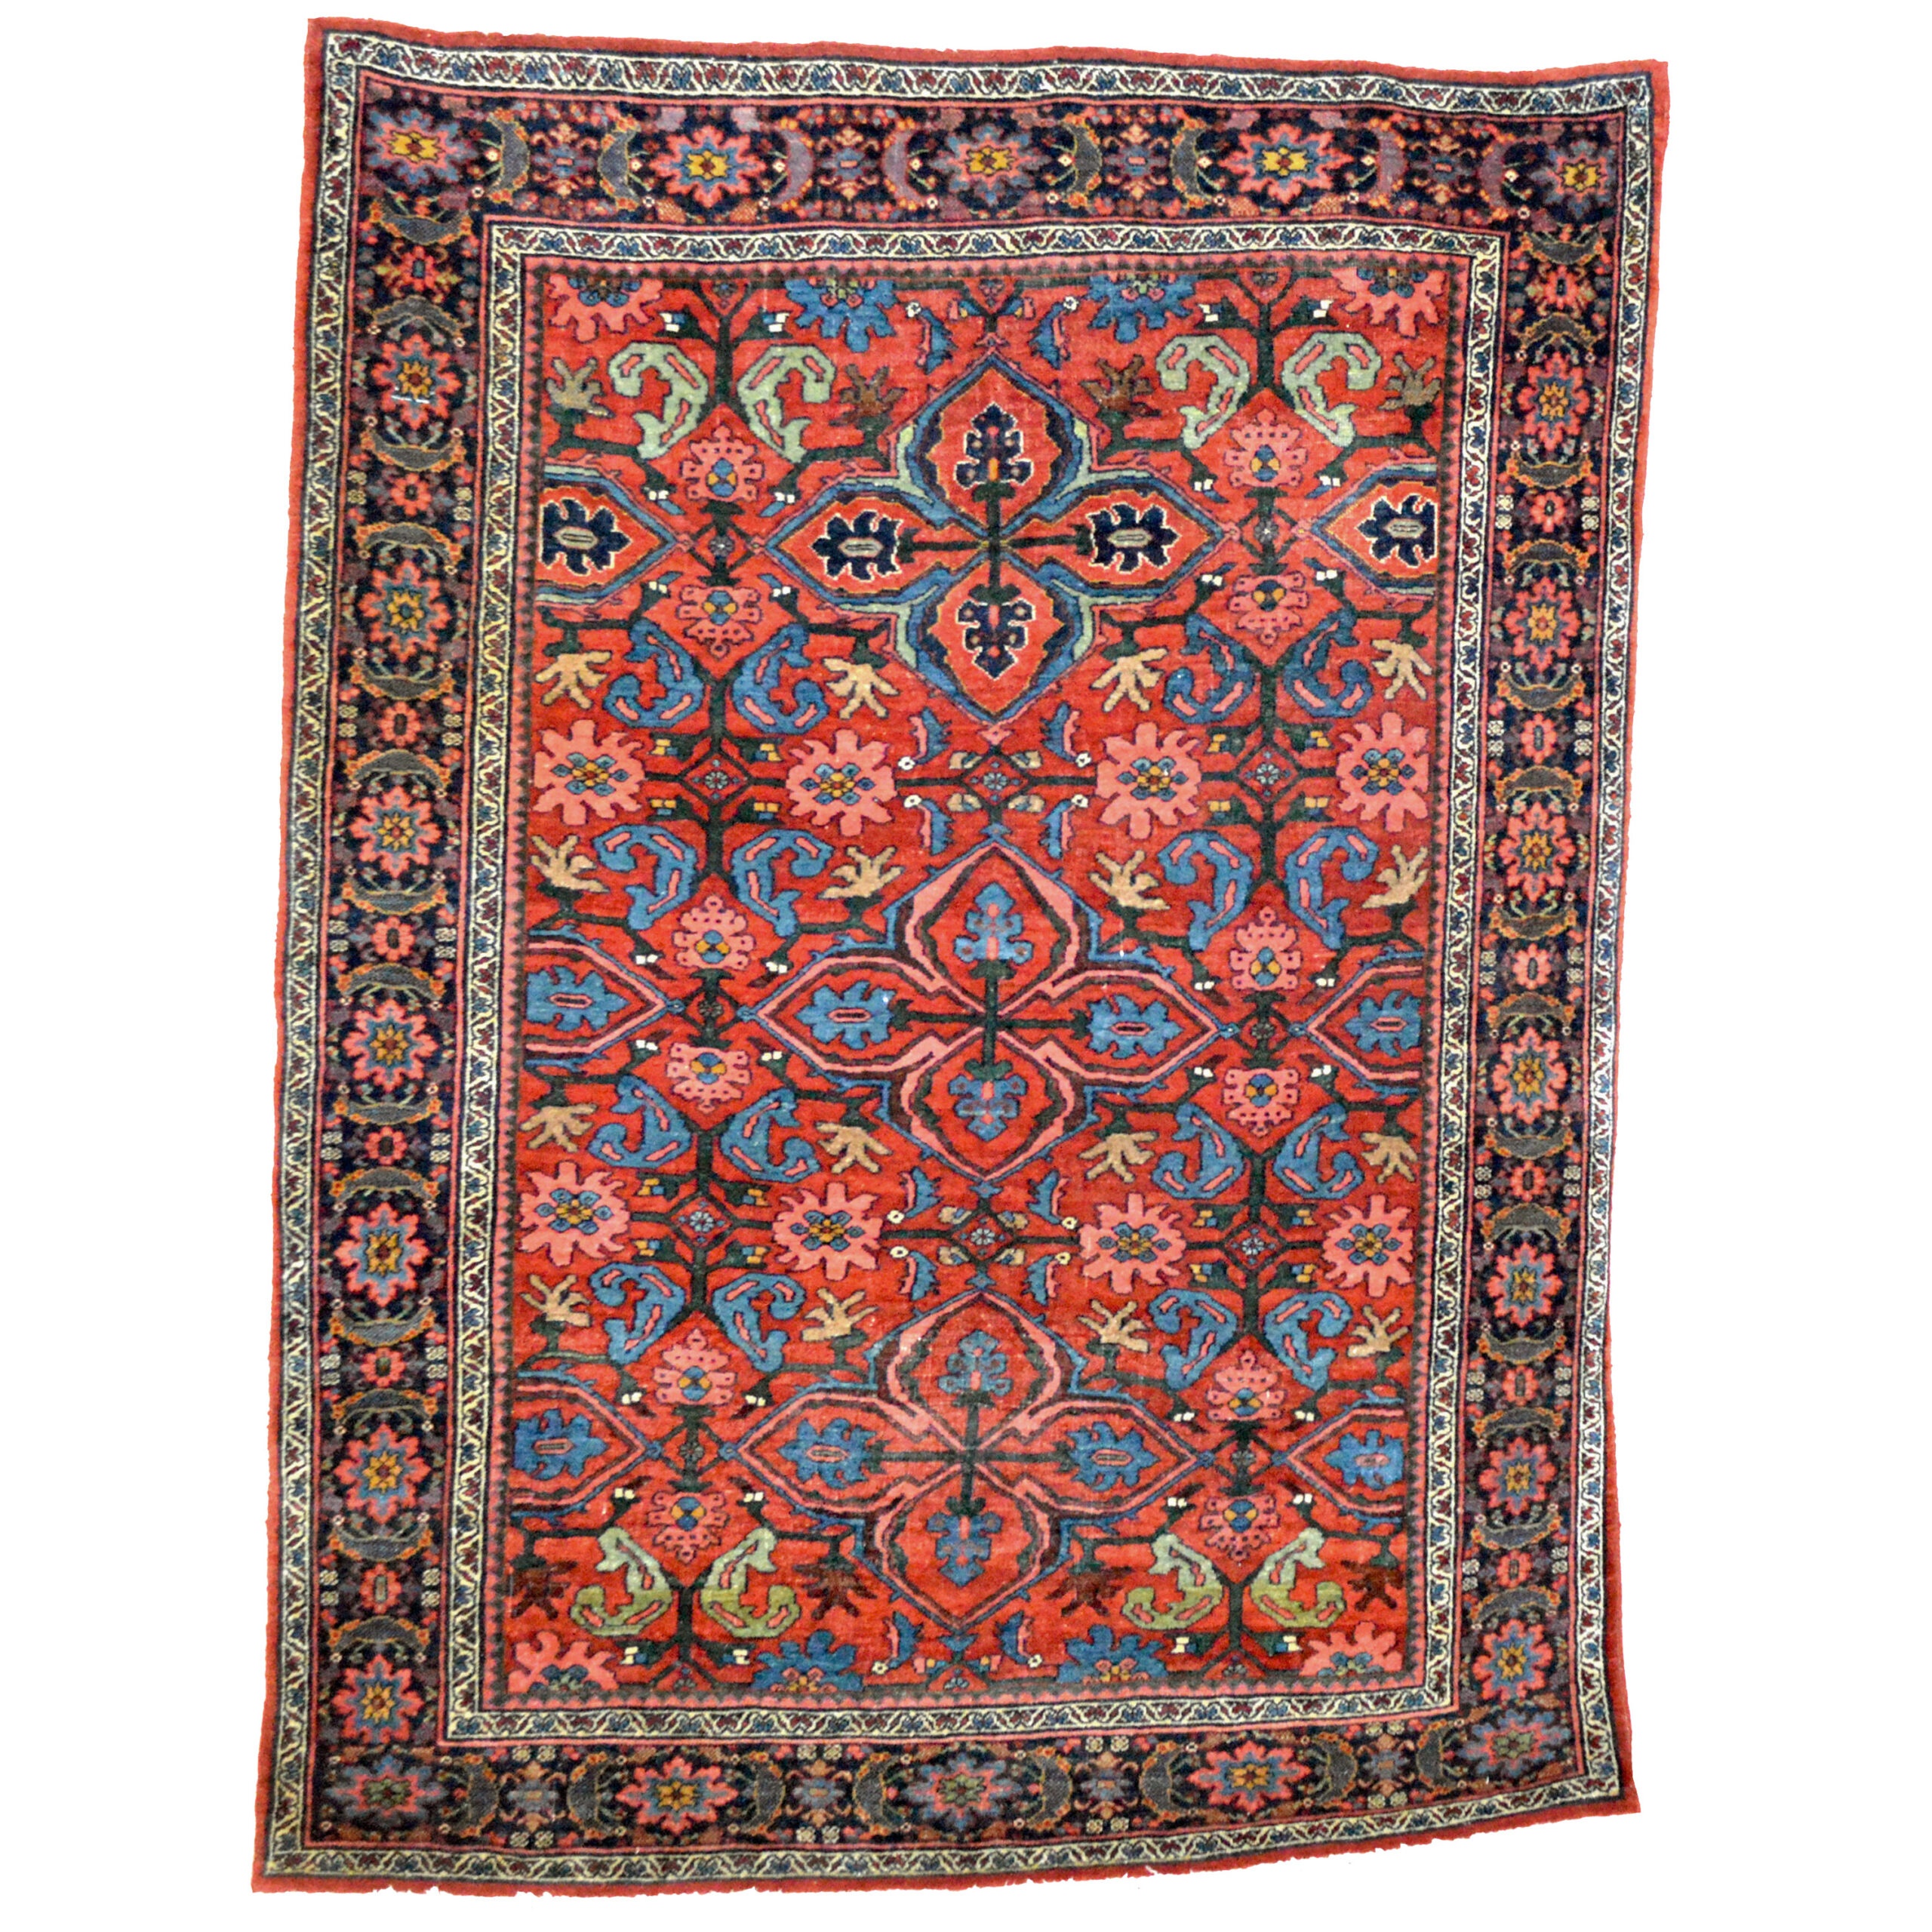 An antique Persian Bidjar rug with a Quatrefoil design on a red field that is framed by a navy blue border with snowflake motifs, northwest Persia, circa 1900 - Boston area based Douglas Stock Gallery is one of America's most selective dealers in antique Oriental rugs including Persian rugs, Caucasian rugs, Turkish rugs and Chinese rugs. Antique Persian rugs Boston, Brookline, Belmont, Concord, Lexington, Weston, Wellesley, Newton, Natick,MA area antique Oriental rugs